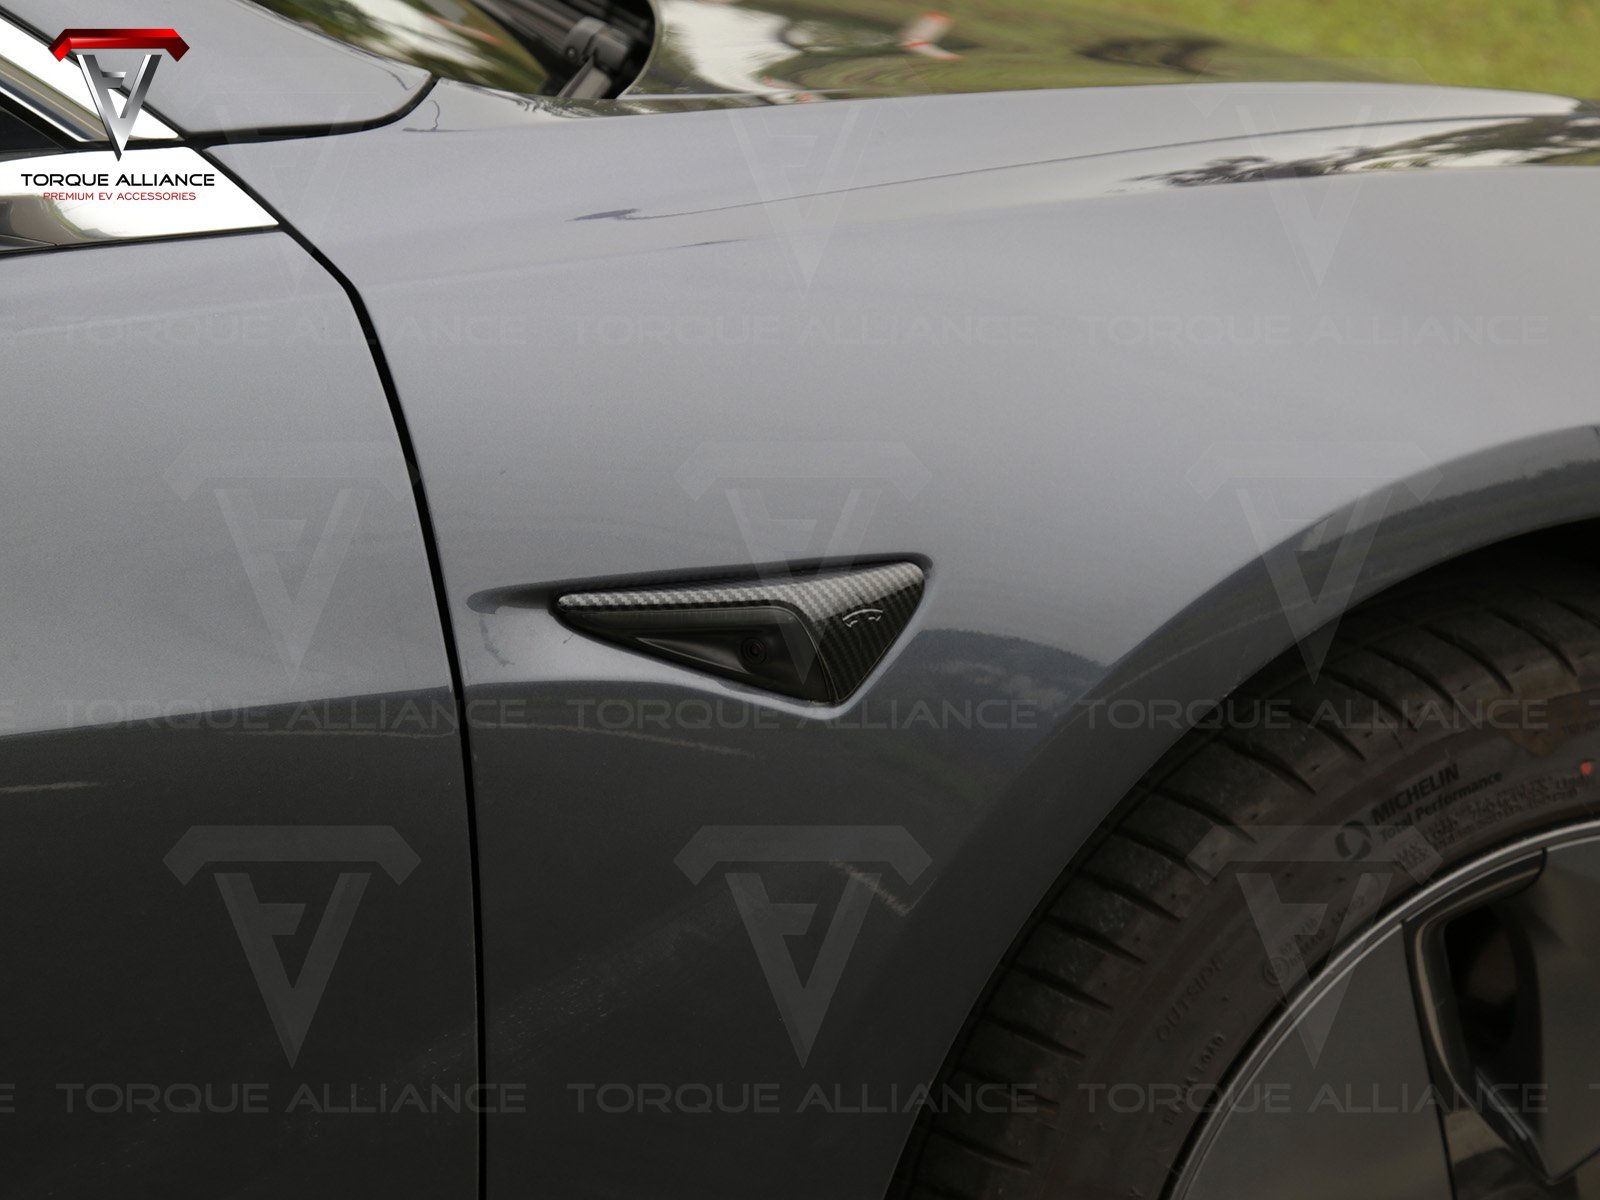 Tesla Model Y: Front Insect Screen, Radiator Protective Mesh Grill Pan -  Torque Alliance